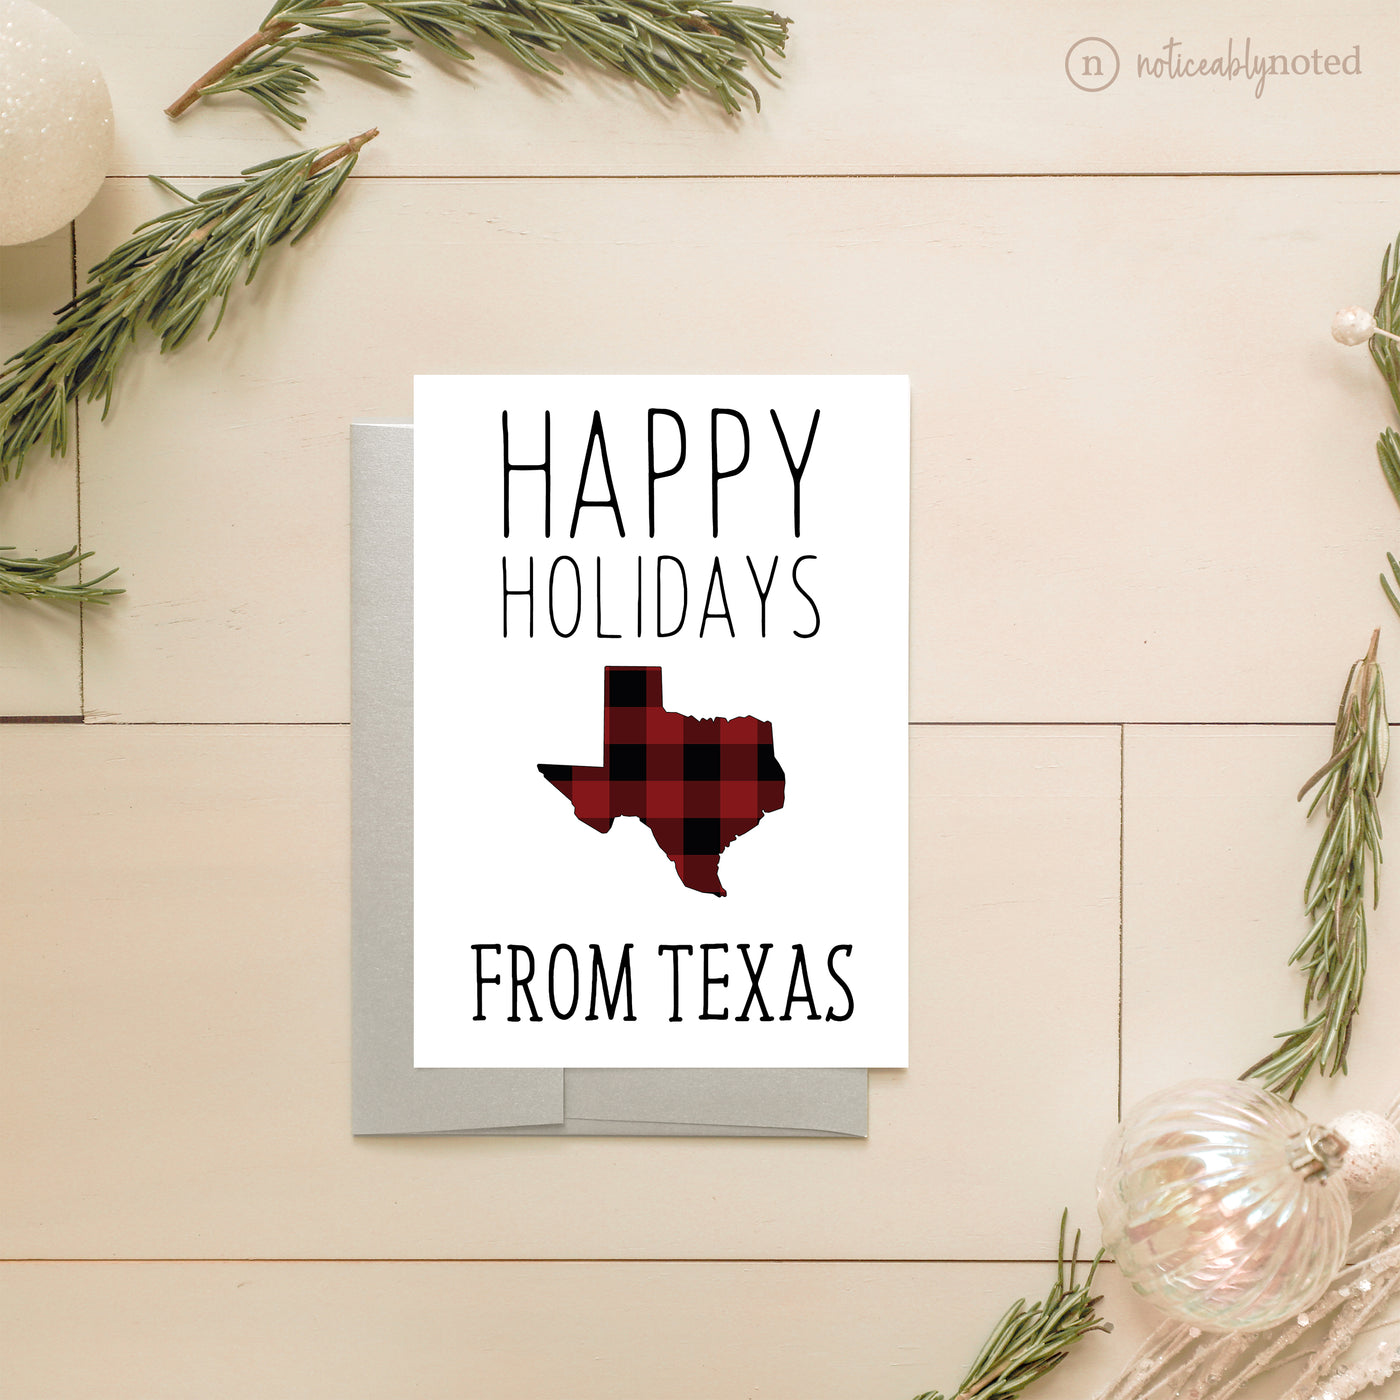 Texas Holiday Card - Happy Holidays | Noticeably Noted